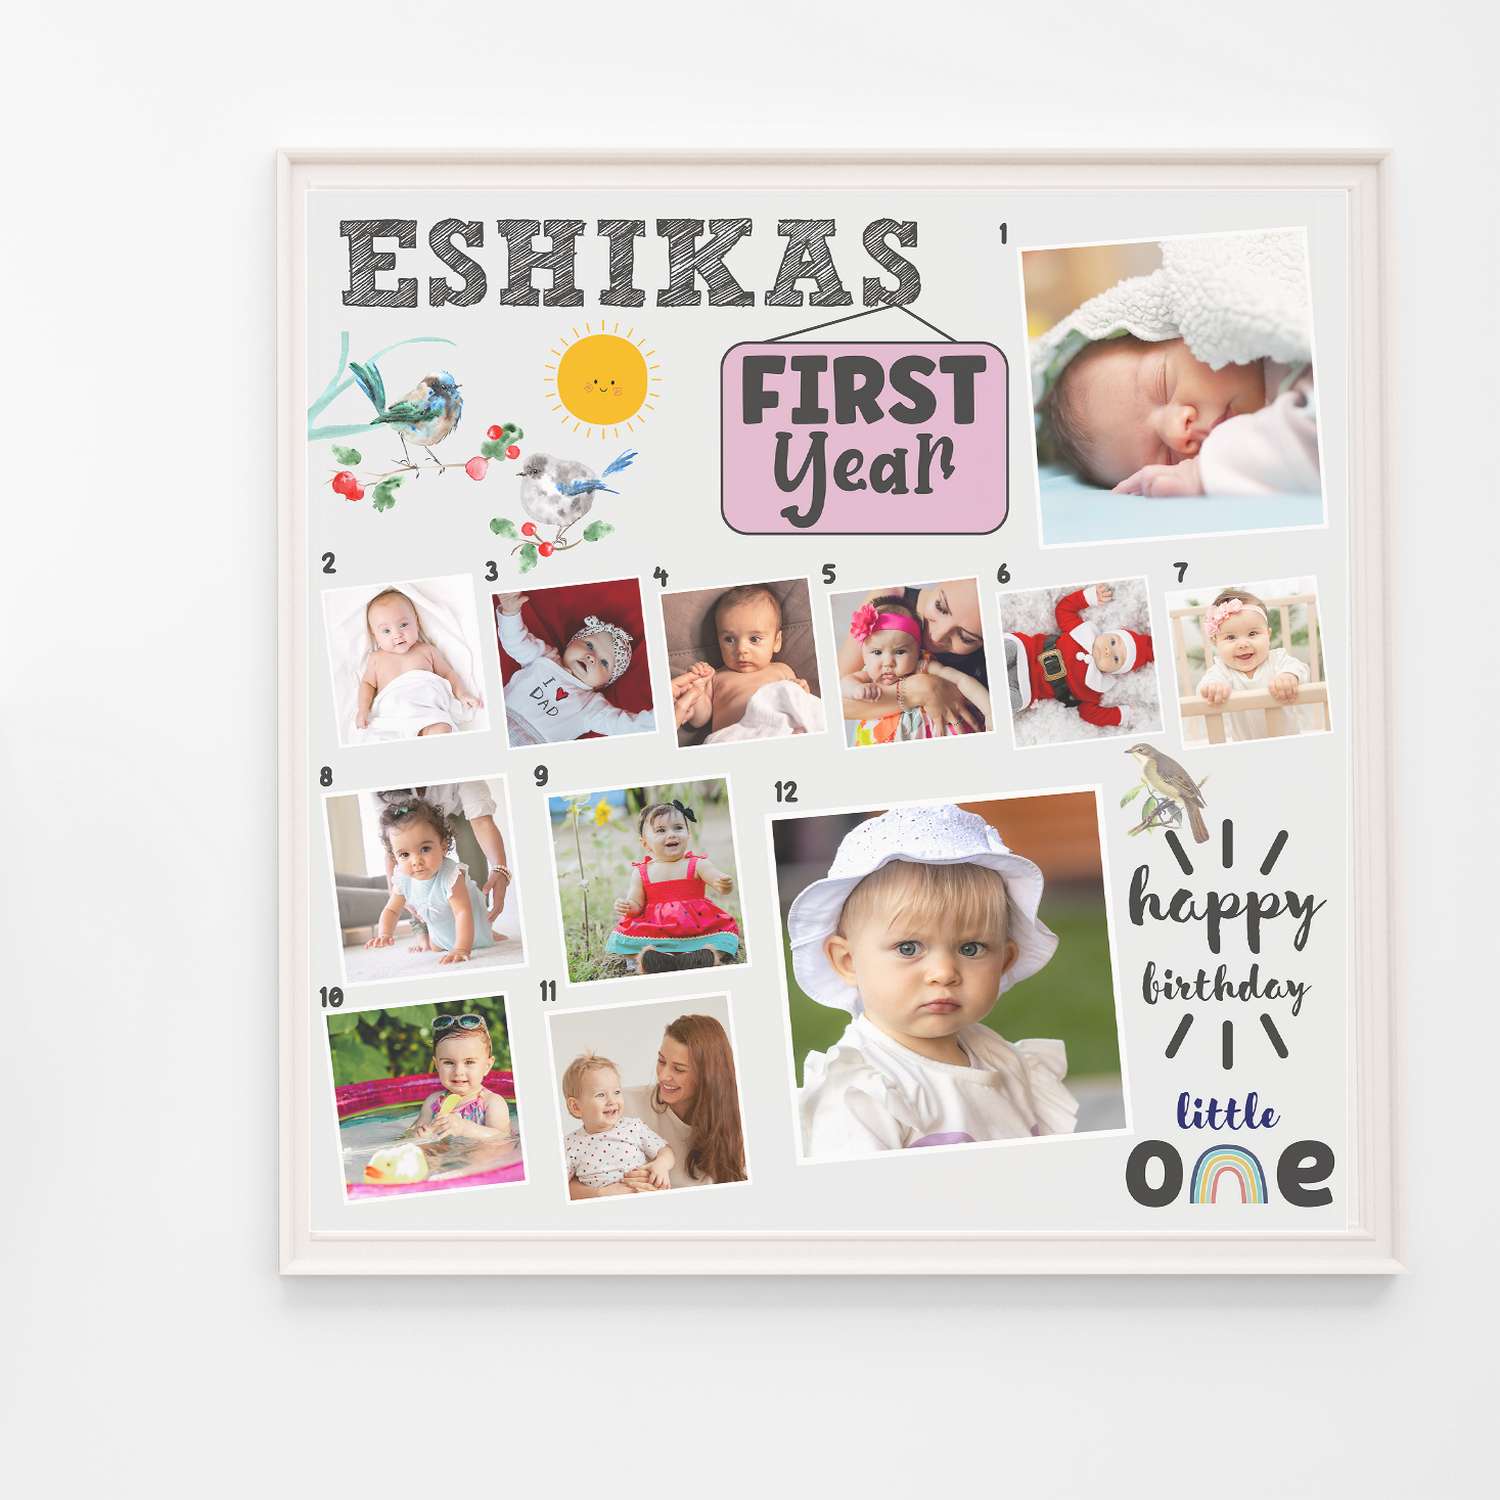 Modern Personalized Gifts | Best Gifts for Kids Birthday | Best Photo Frame